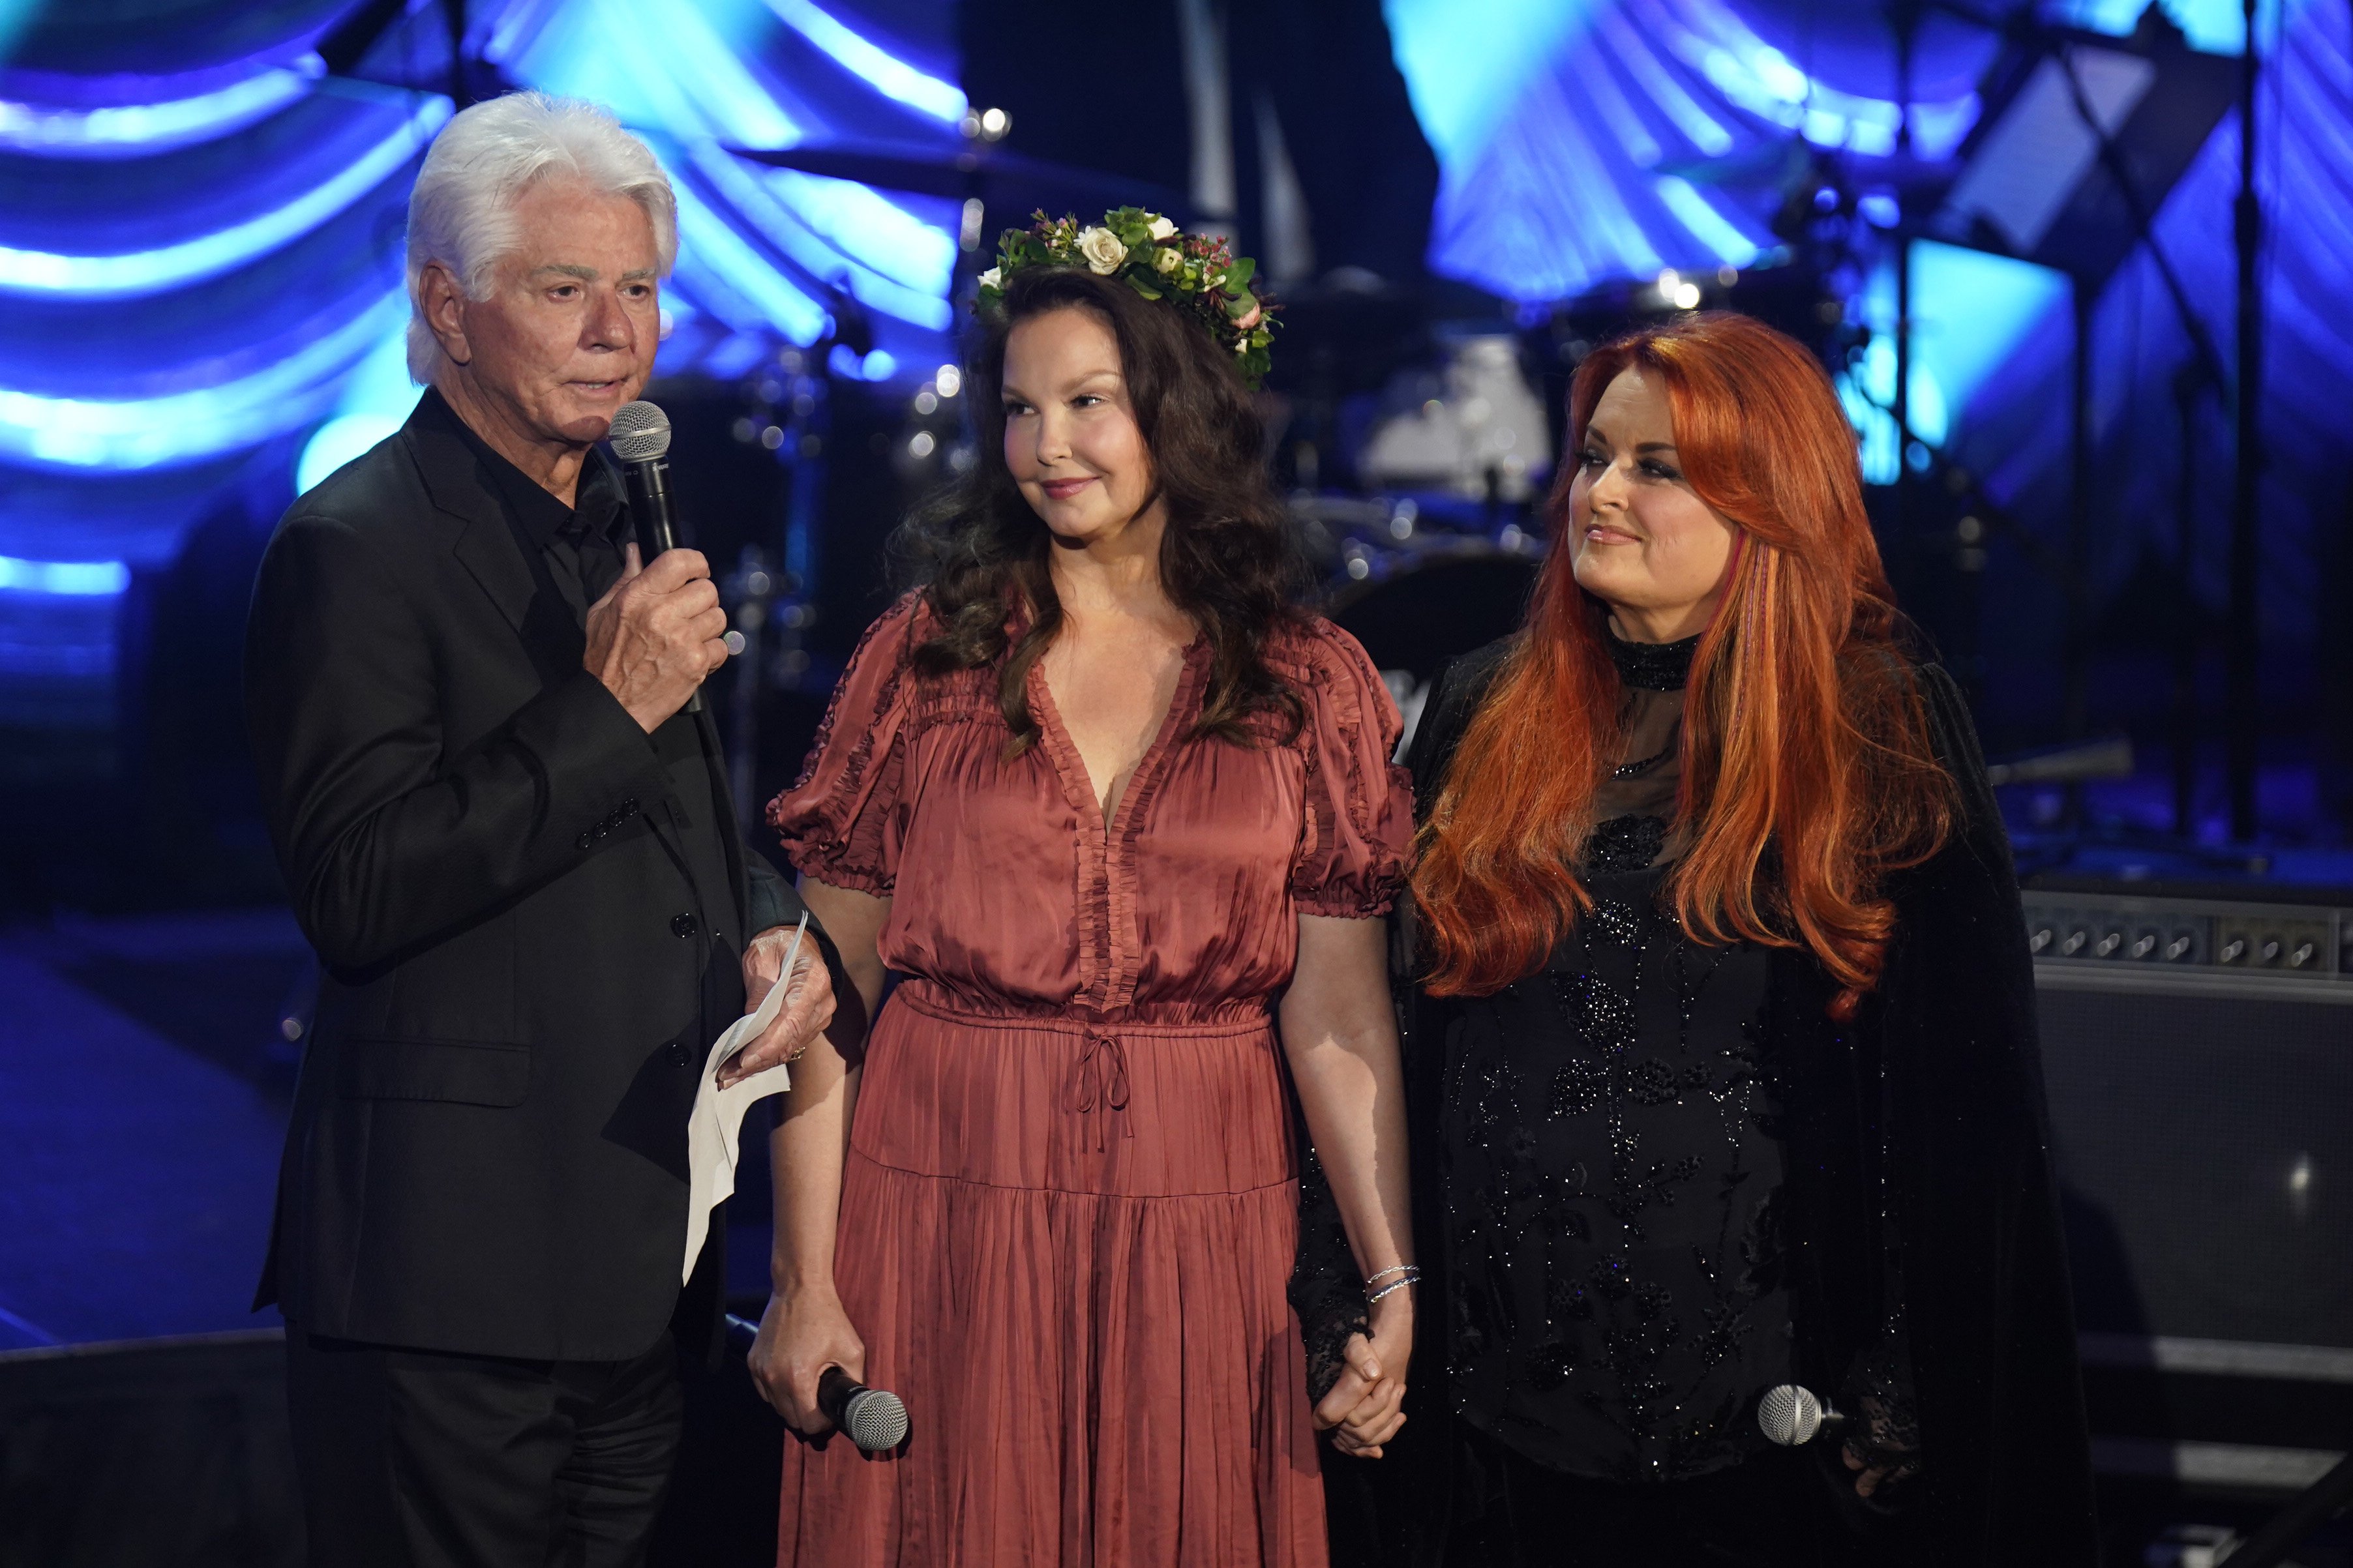 Larry Strickland, Ashley and Wynonna Judd onstage at the "Naomi Judd: A River Of Time" Celebration on May 15, 2022, in Nashville, Tennessee. | Source: Mickey Bernal/Getty Images